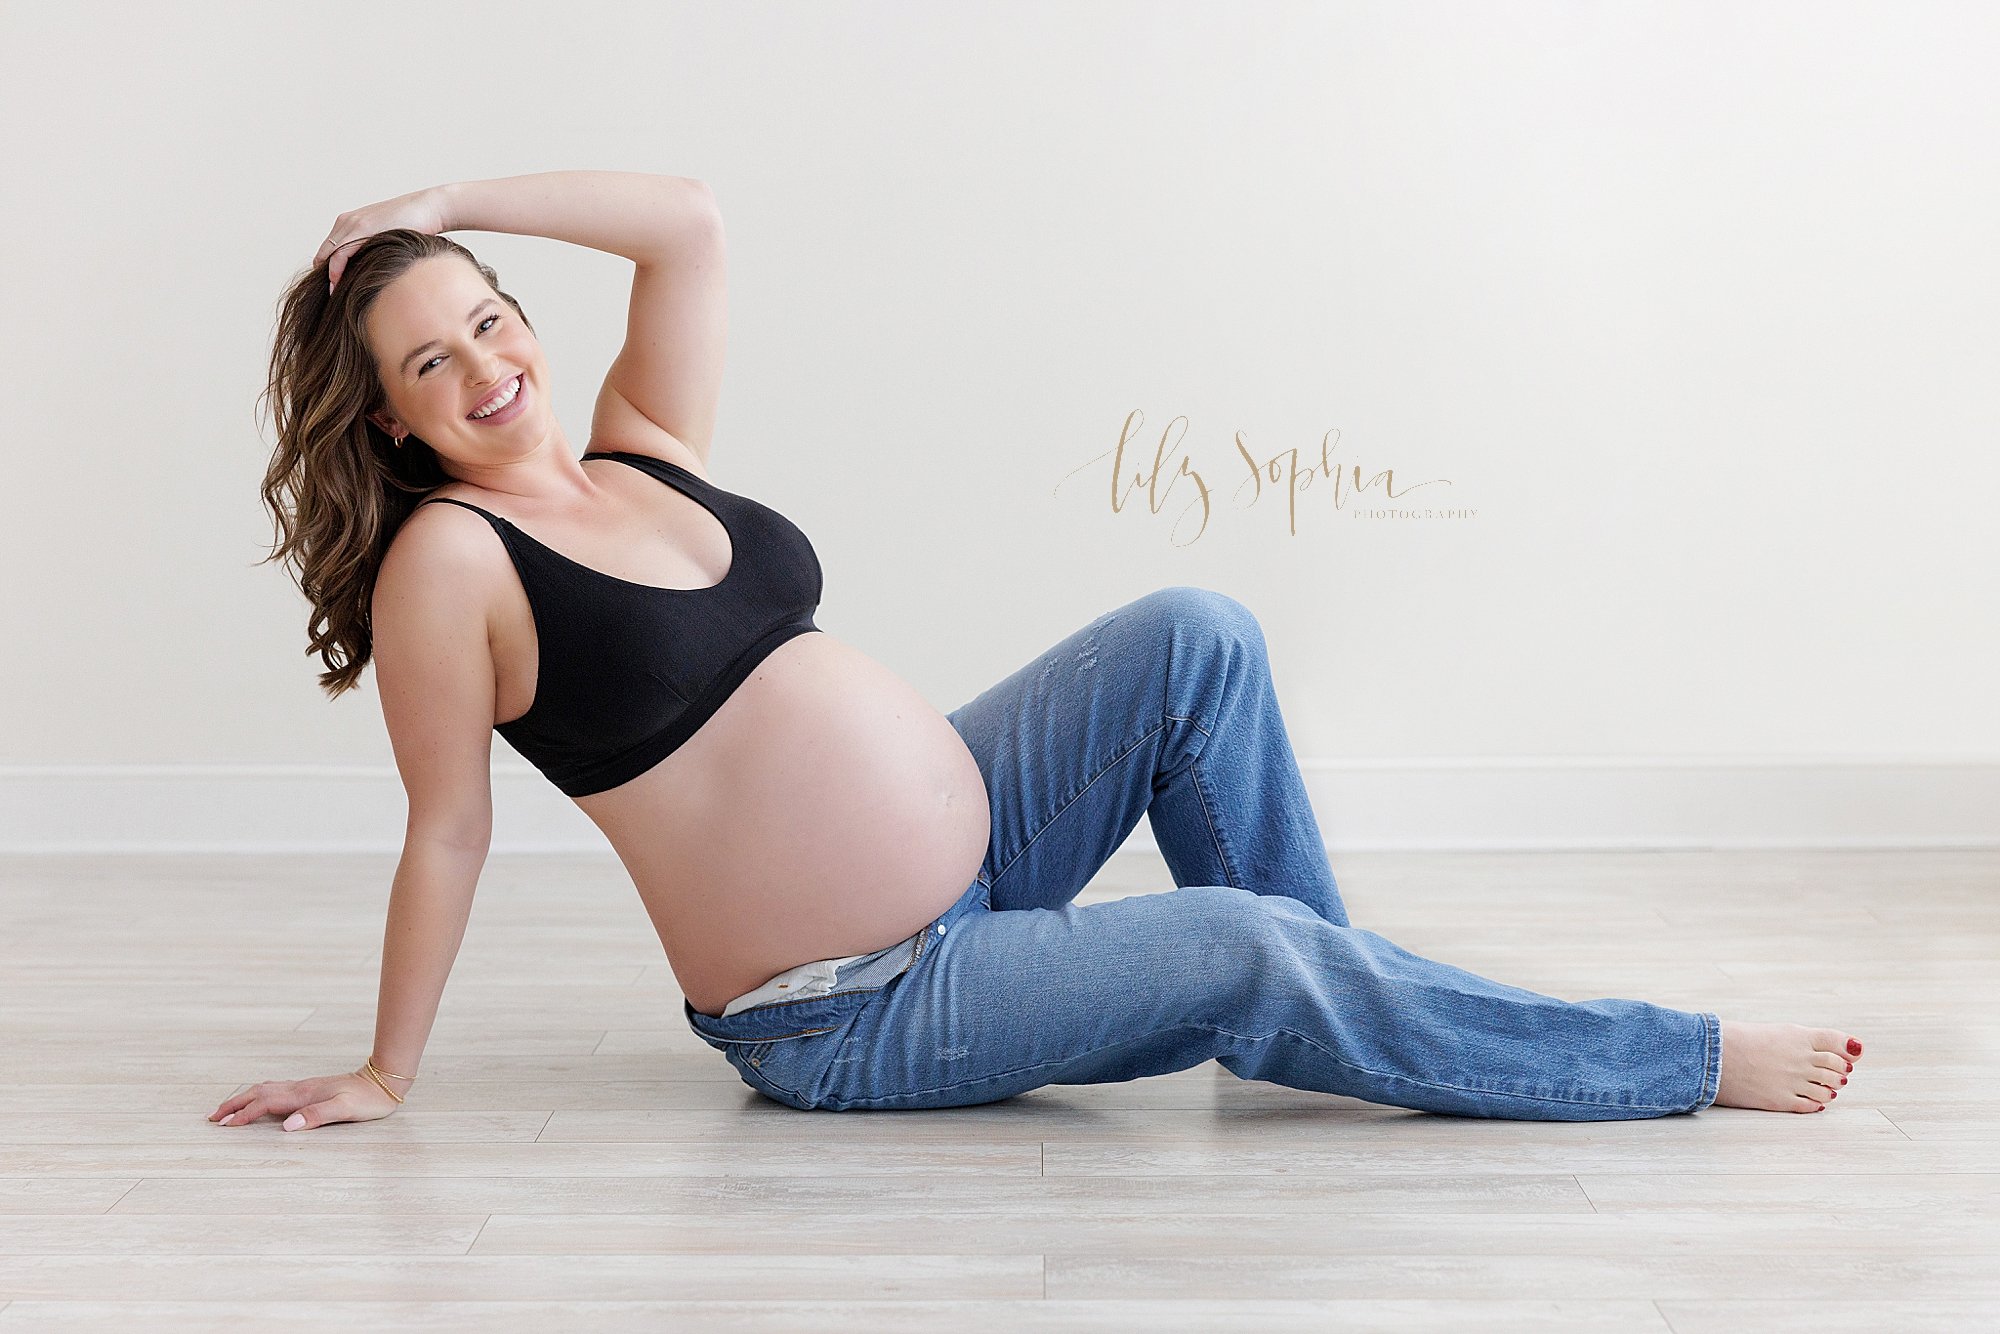  Maternity photo session in a natural light studio with an expectant mother as she sits on the floor of the studio wearing a black bra and blue jeans unbuttoned to bare her belly as she leans with her right hand on the floor and her left hand on the 